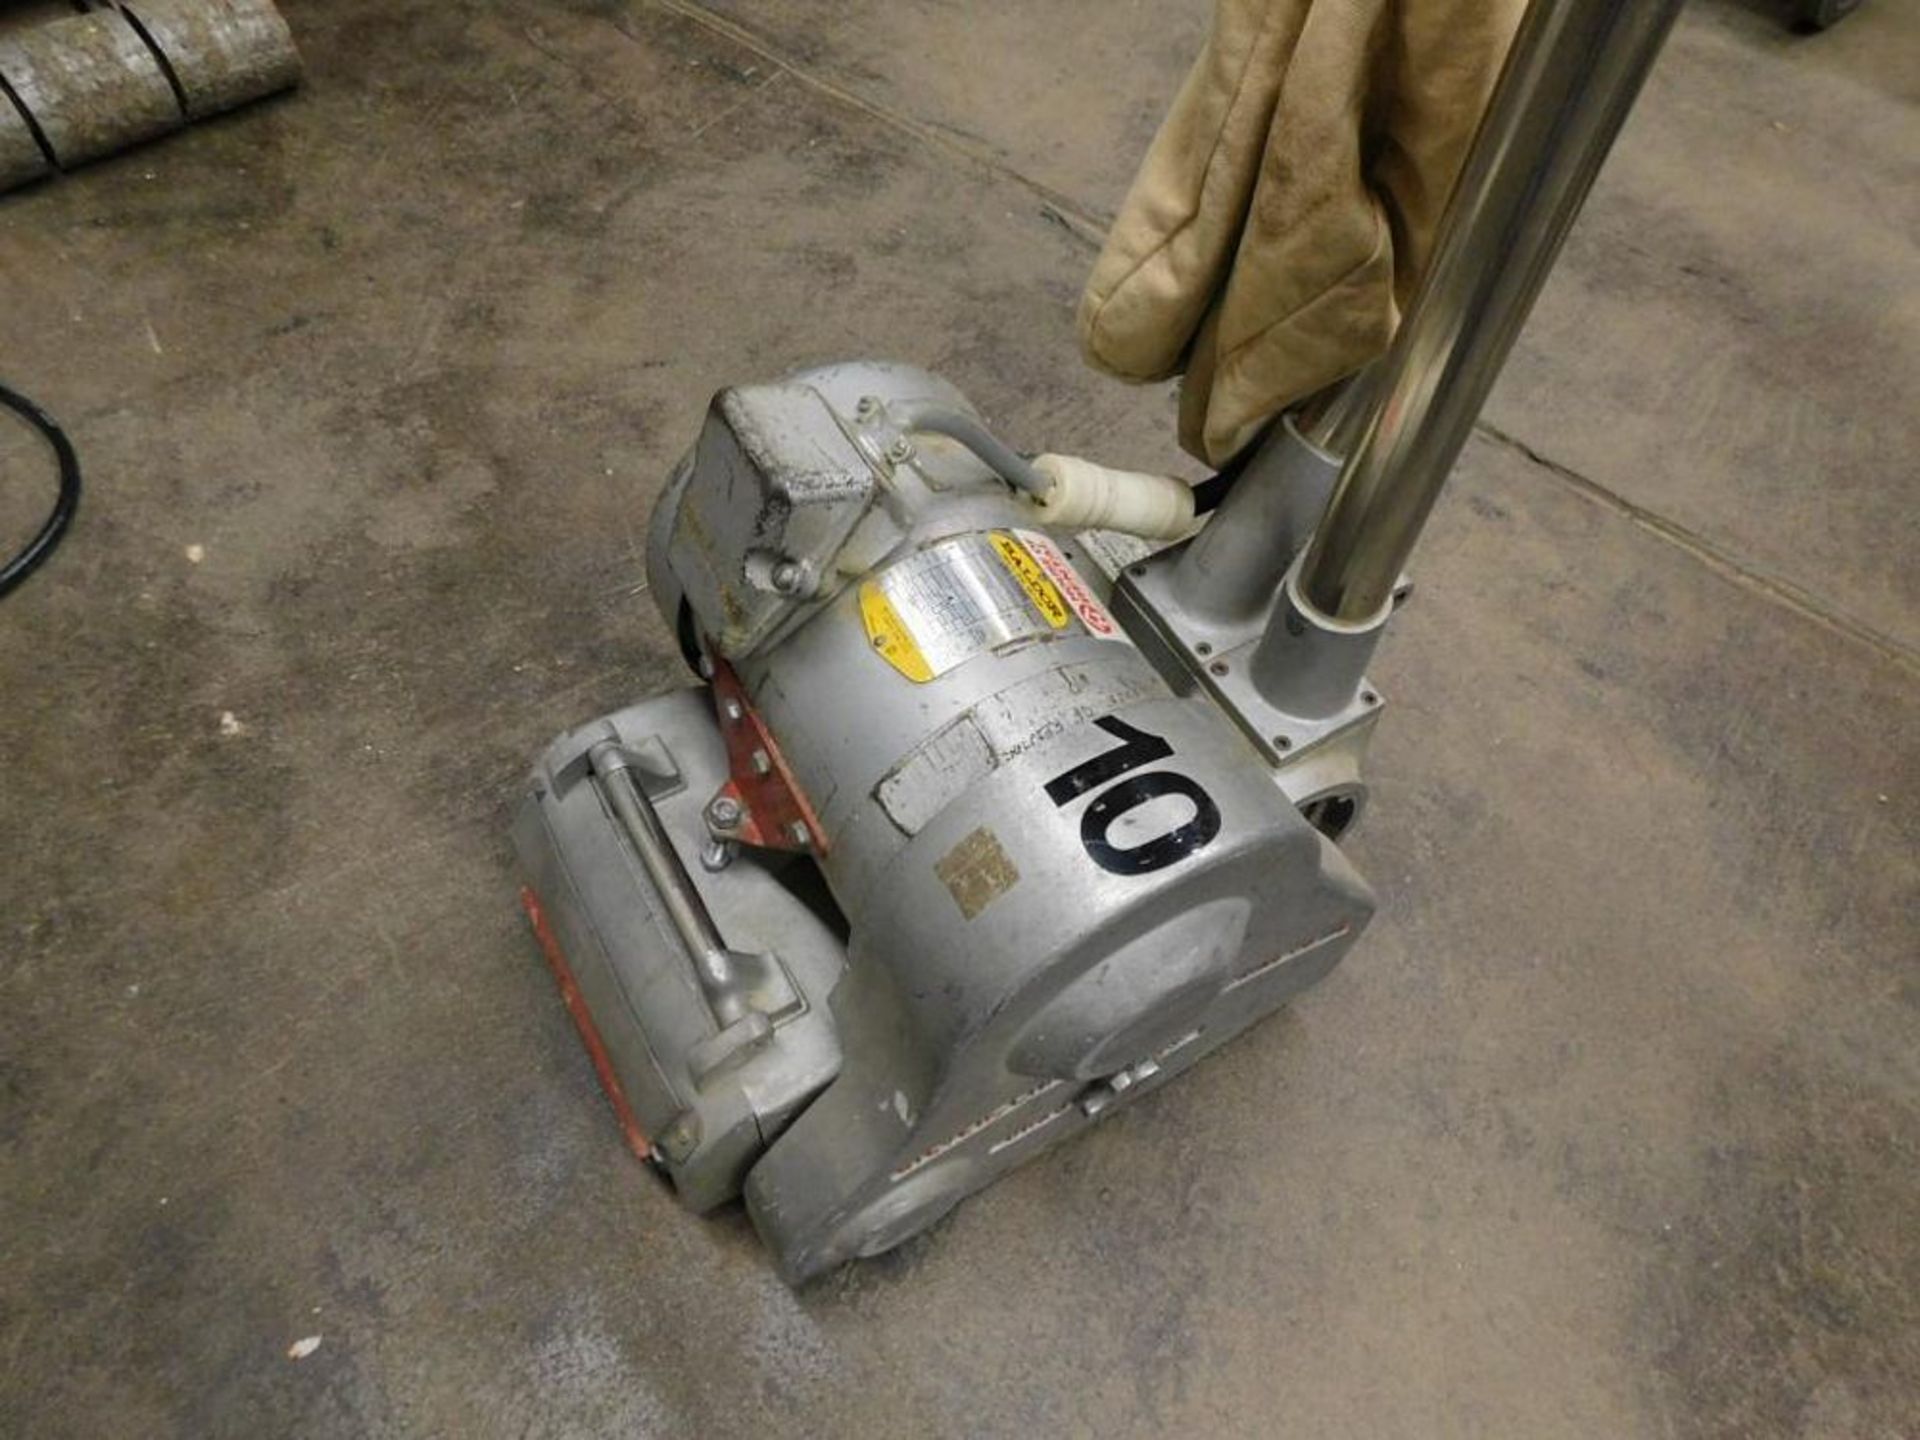 8" Drum Floor Sander, 1 HP w/Electrical Cord (LOCATION: 318 N. Milwaukee Ave., Wheeling, IL 60090) - Image 3 of 5